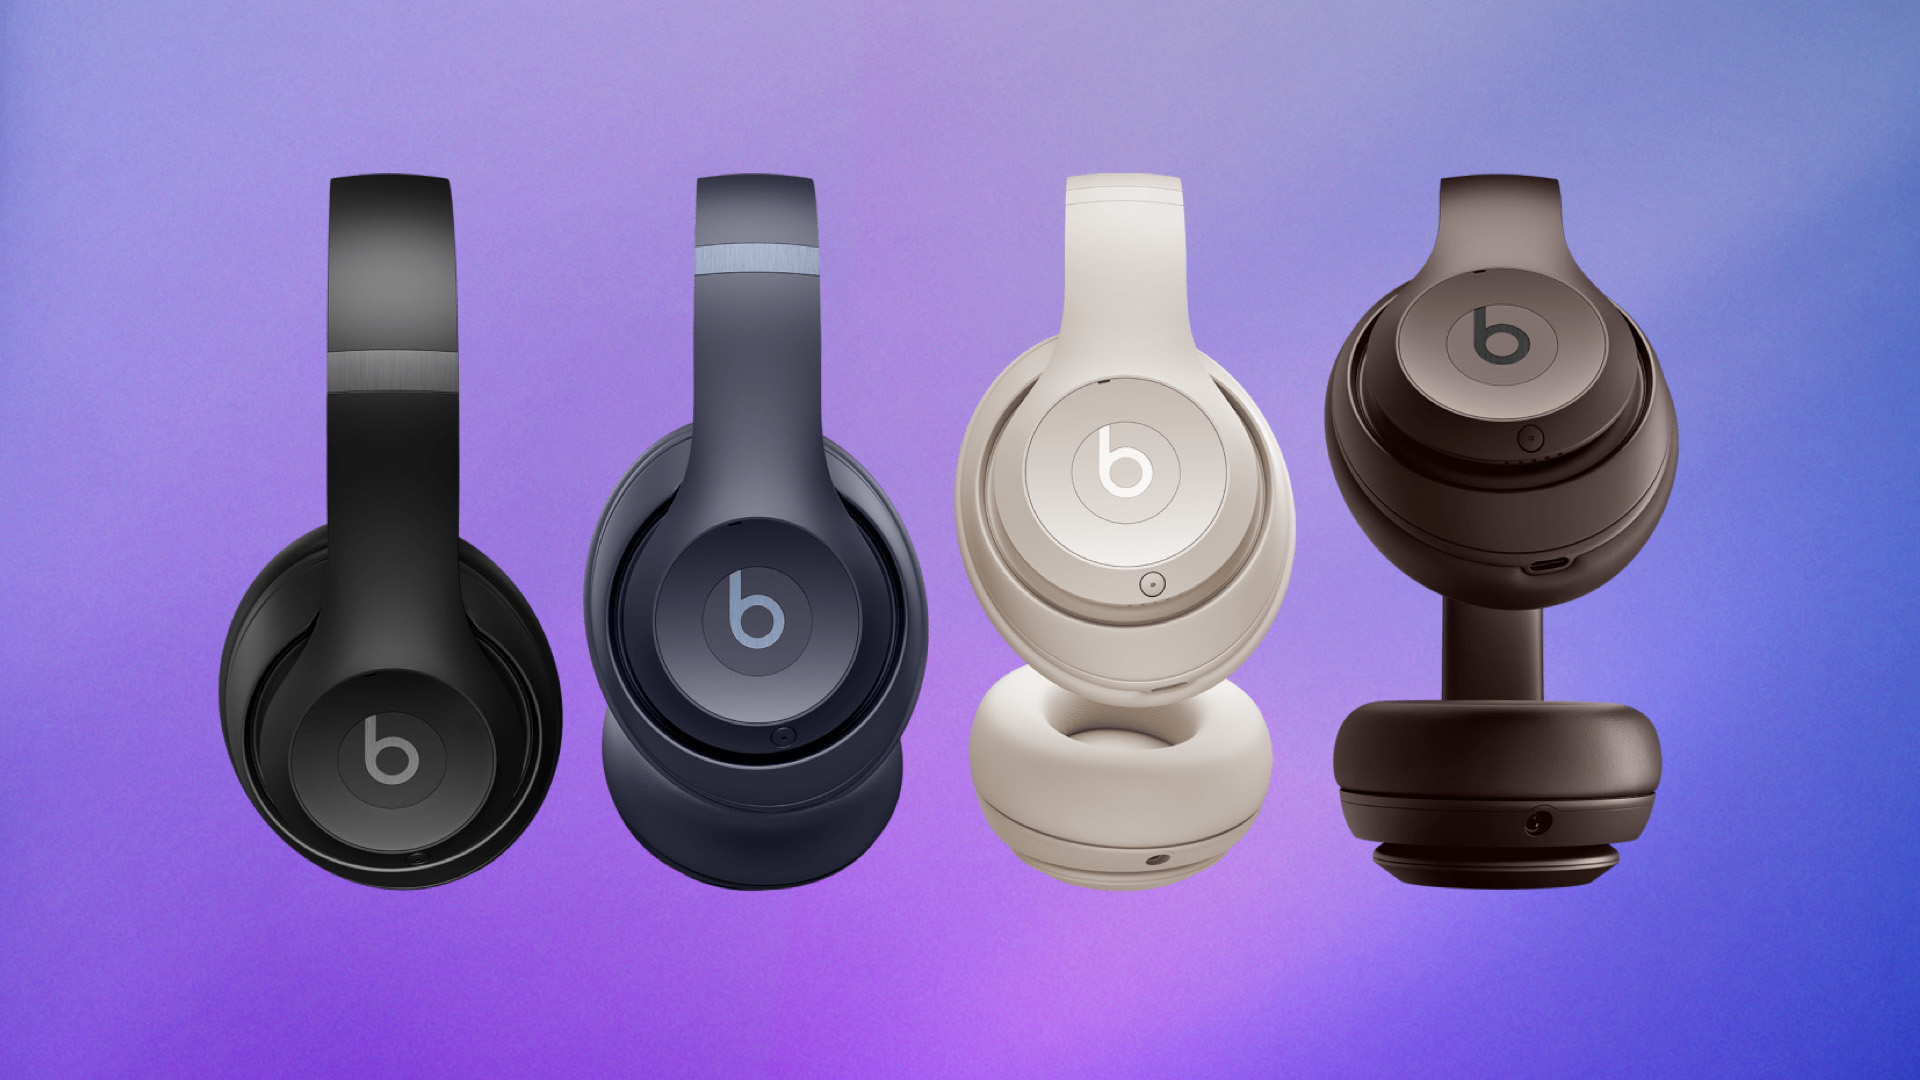 The New Beats Studio Pro Headphones Are Available for Nearly Half Off at $179